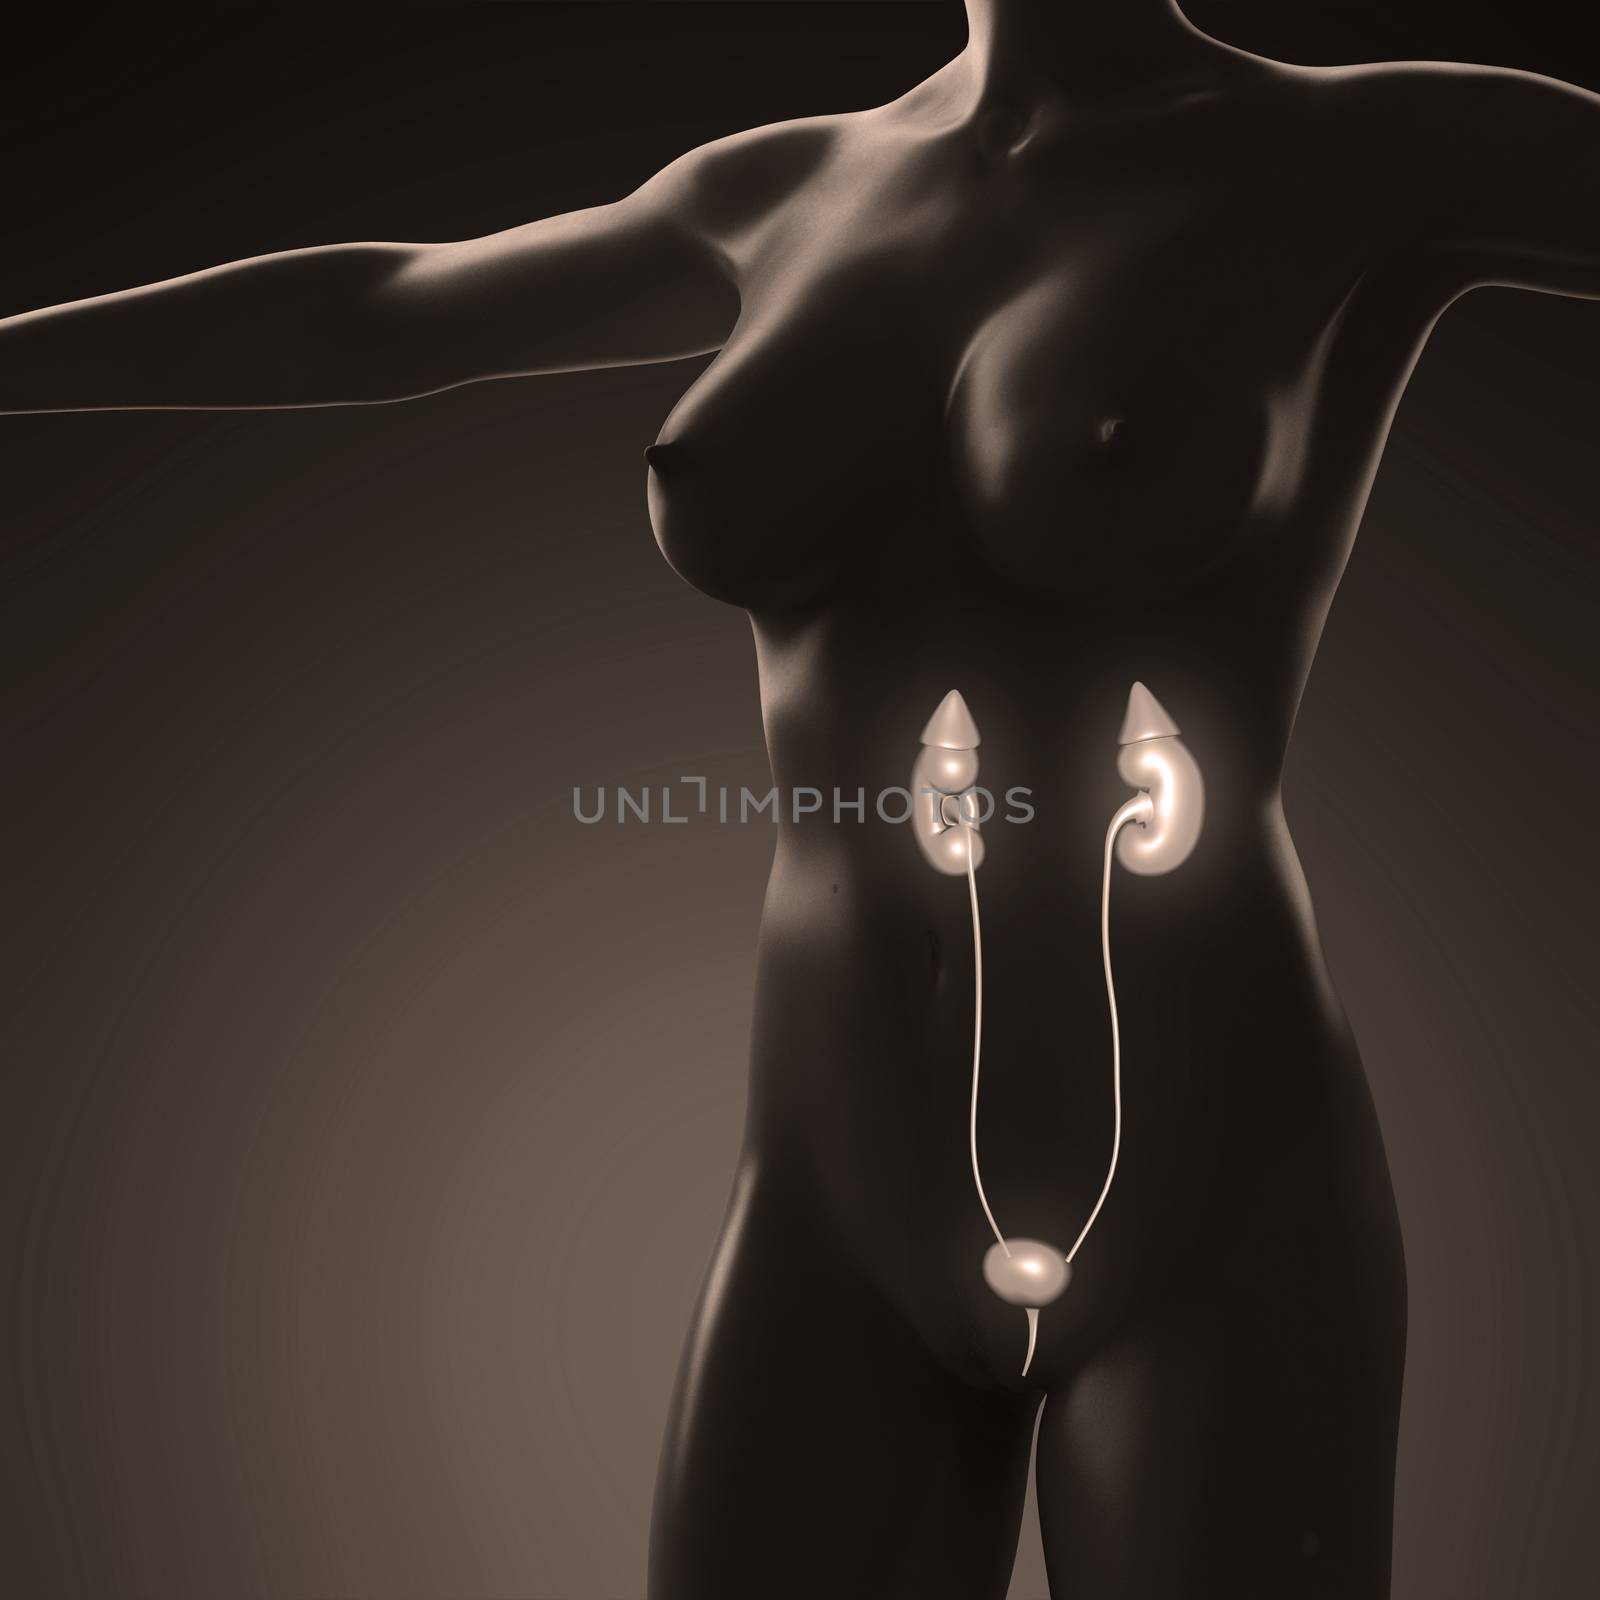 science anatomy of human body with glow kidney by icetray